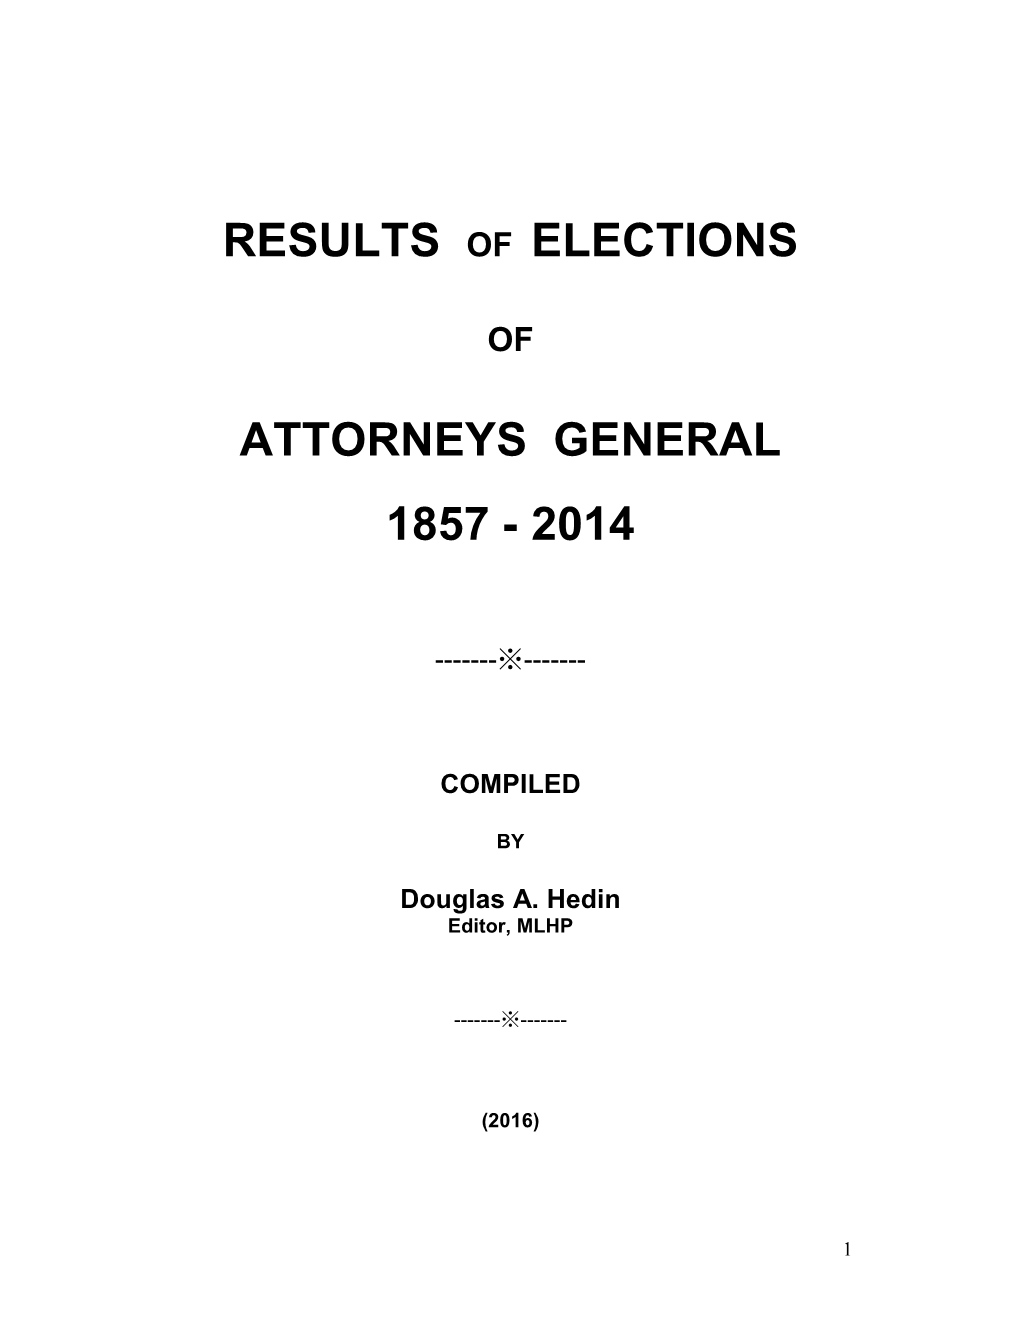 Results of Elections Attorneys General 1857